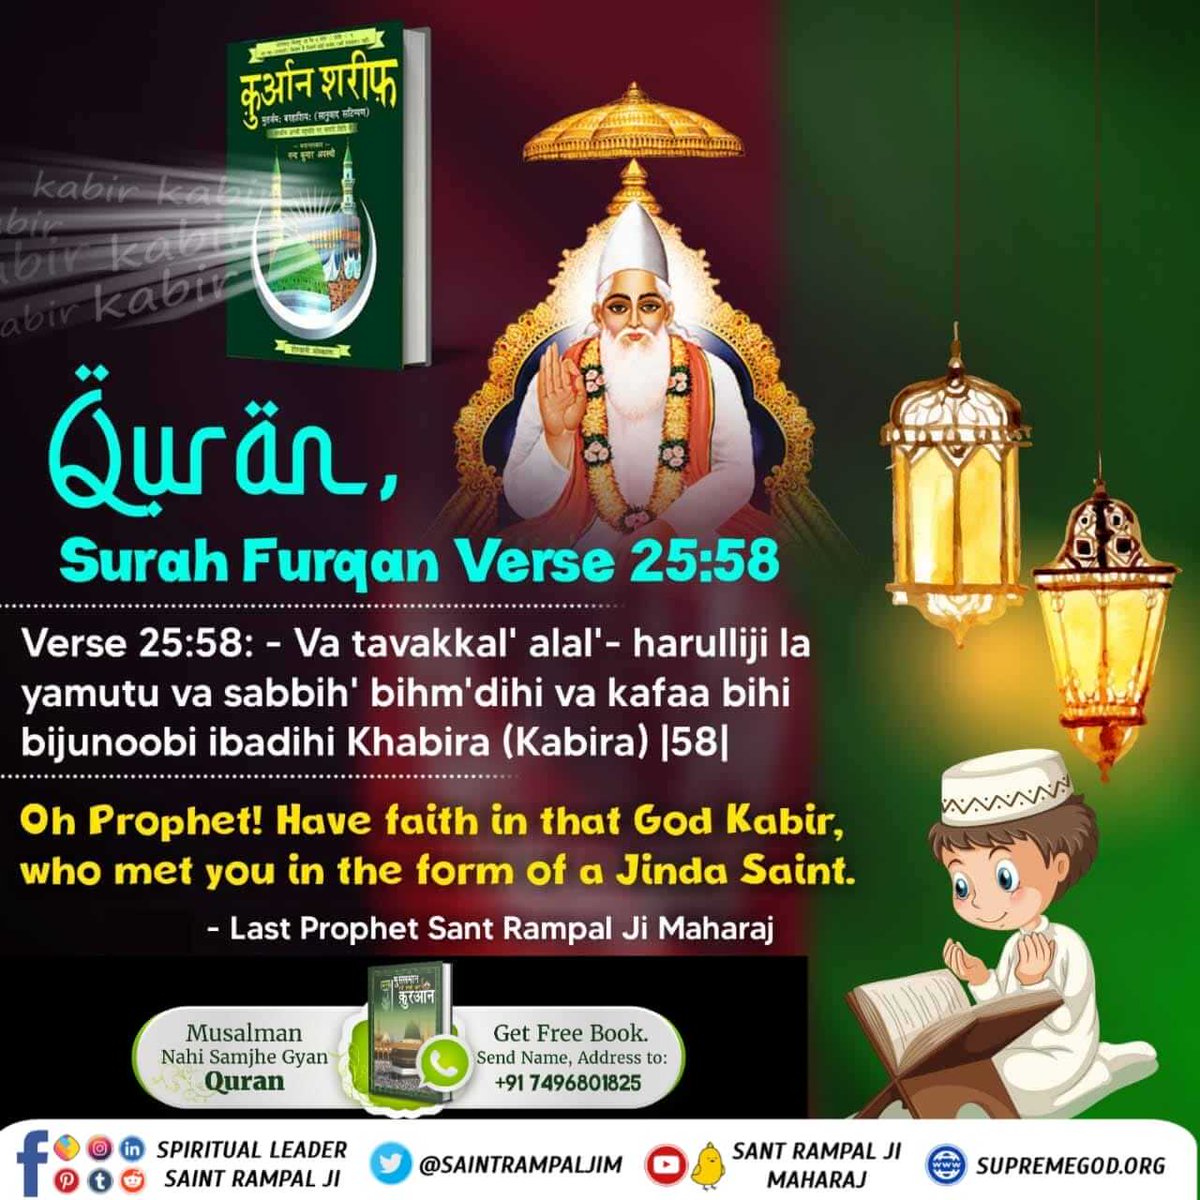 #GodMorningWednesday 
#MessageOfAllahOnEid
Allah (Lord), the giver of Quranic knowledge, is pointing towards some other perfect God that O Prophet, have faith in that Kabir God who met you in the form of a living Mahatma.

#wednesdaythought 
#OnePlus10R